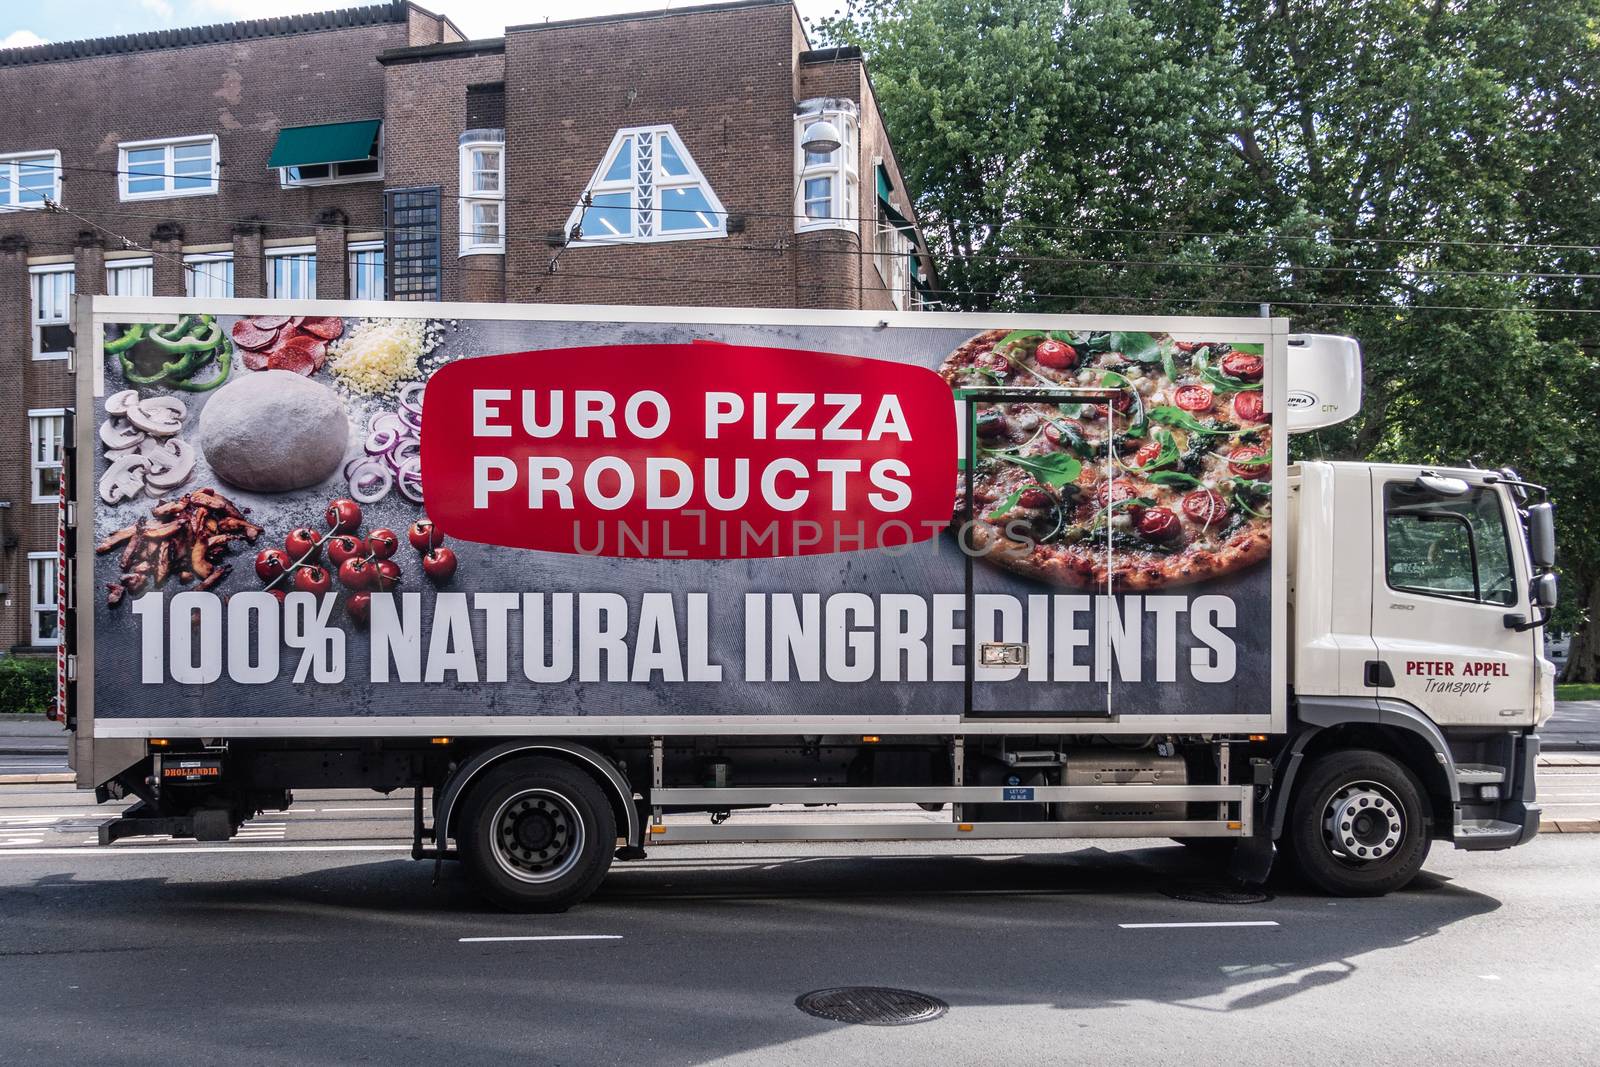 Amsterdam, the Netherlands - July 1, 2019: Euro Pizza producer and merchant deliver truck. Side plastered by huge photos of Pizza and ingredients. Street scene with green foliage.